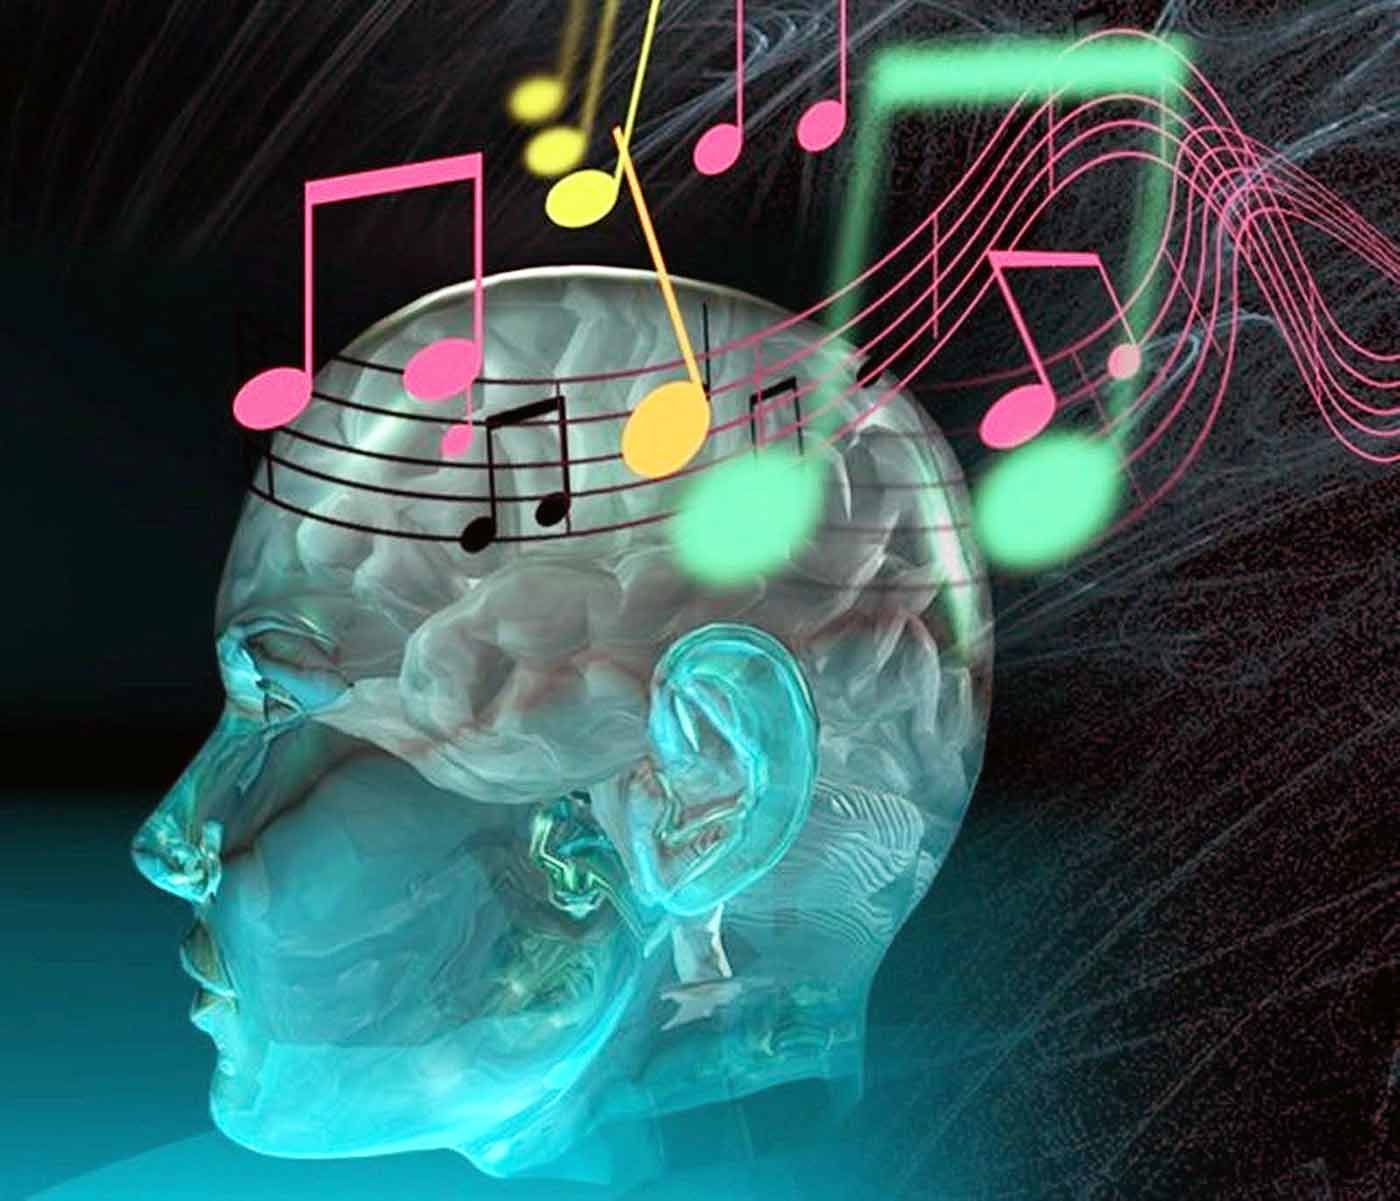 brain surrounded by music staffs and music notes